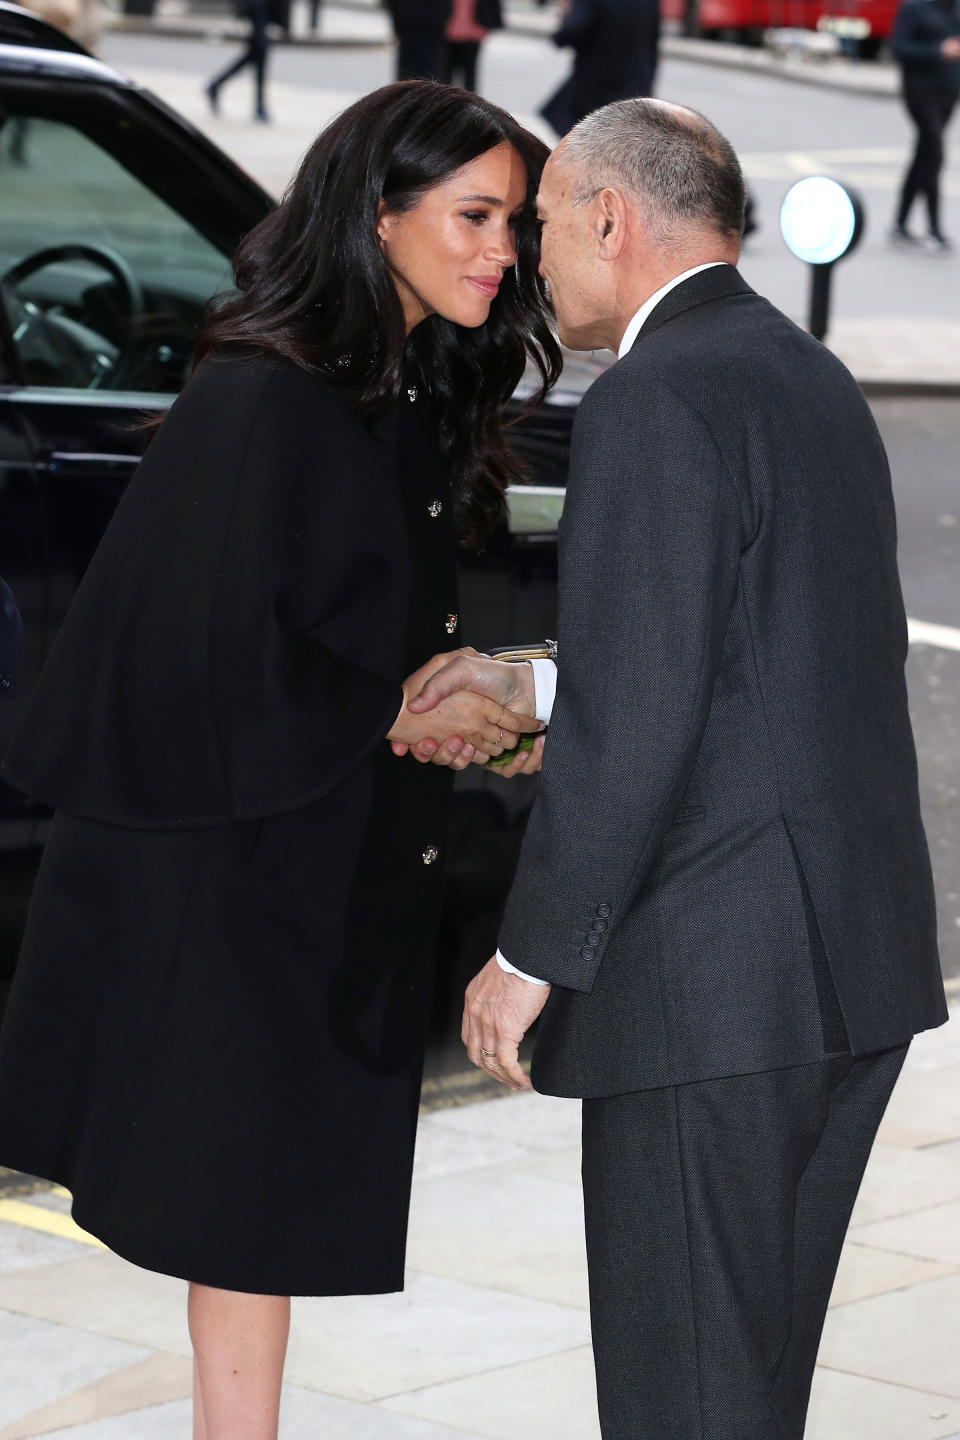 The duchess gives the hongi, a traditional maori greeting as she arrives at New Zealand House [Photo: Getty]